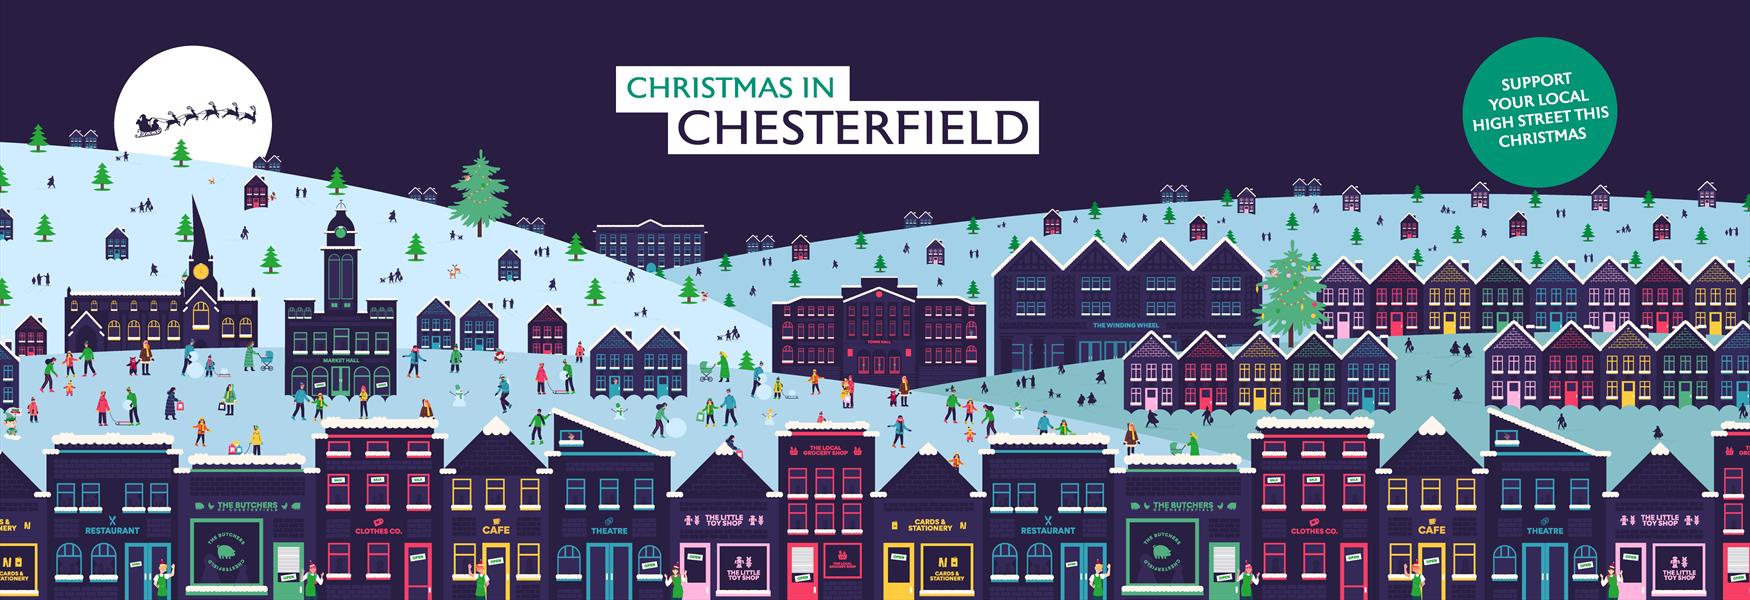 Christmas in Chesterfield - Support your local high street this Christmas